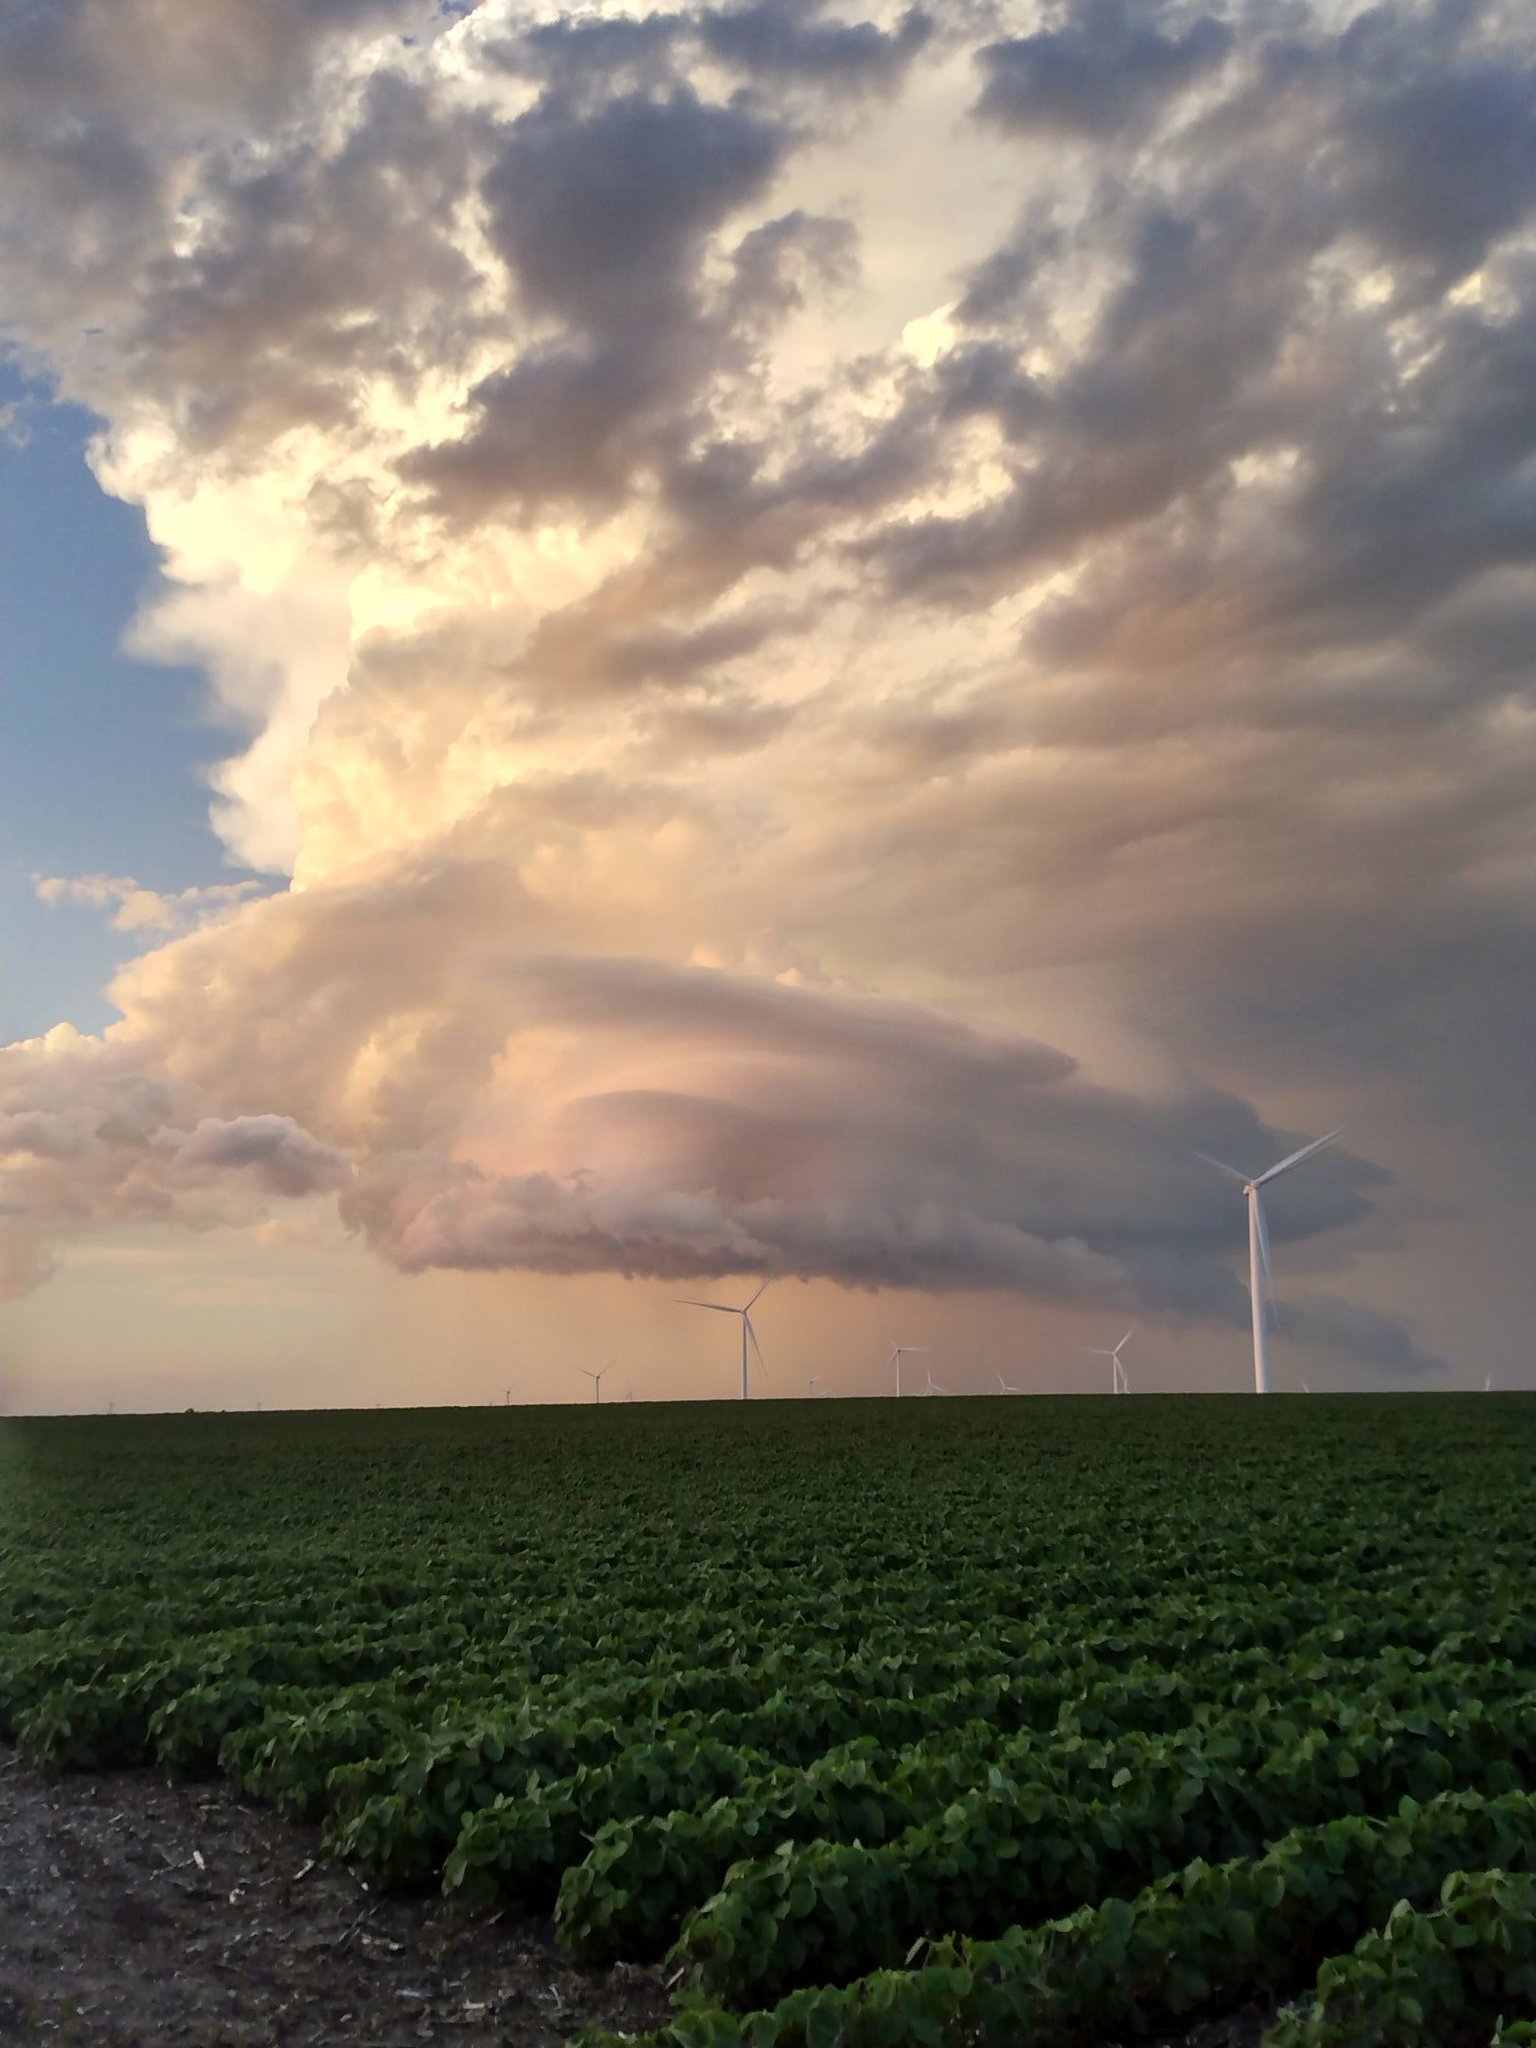 Photo of the supercell thunderstorm taken from Primghar, Iowa.